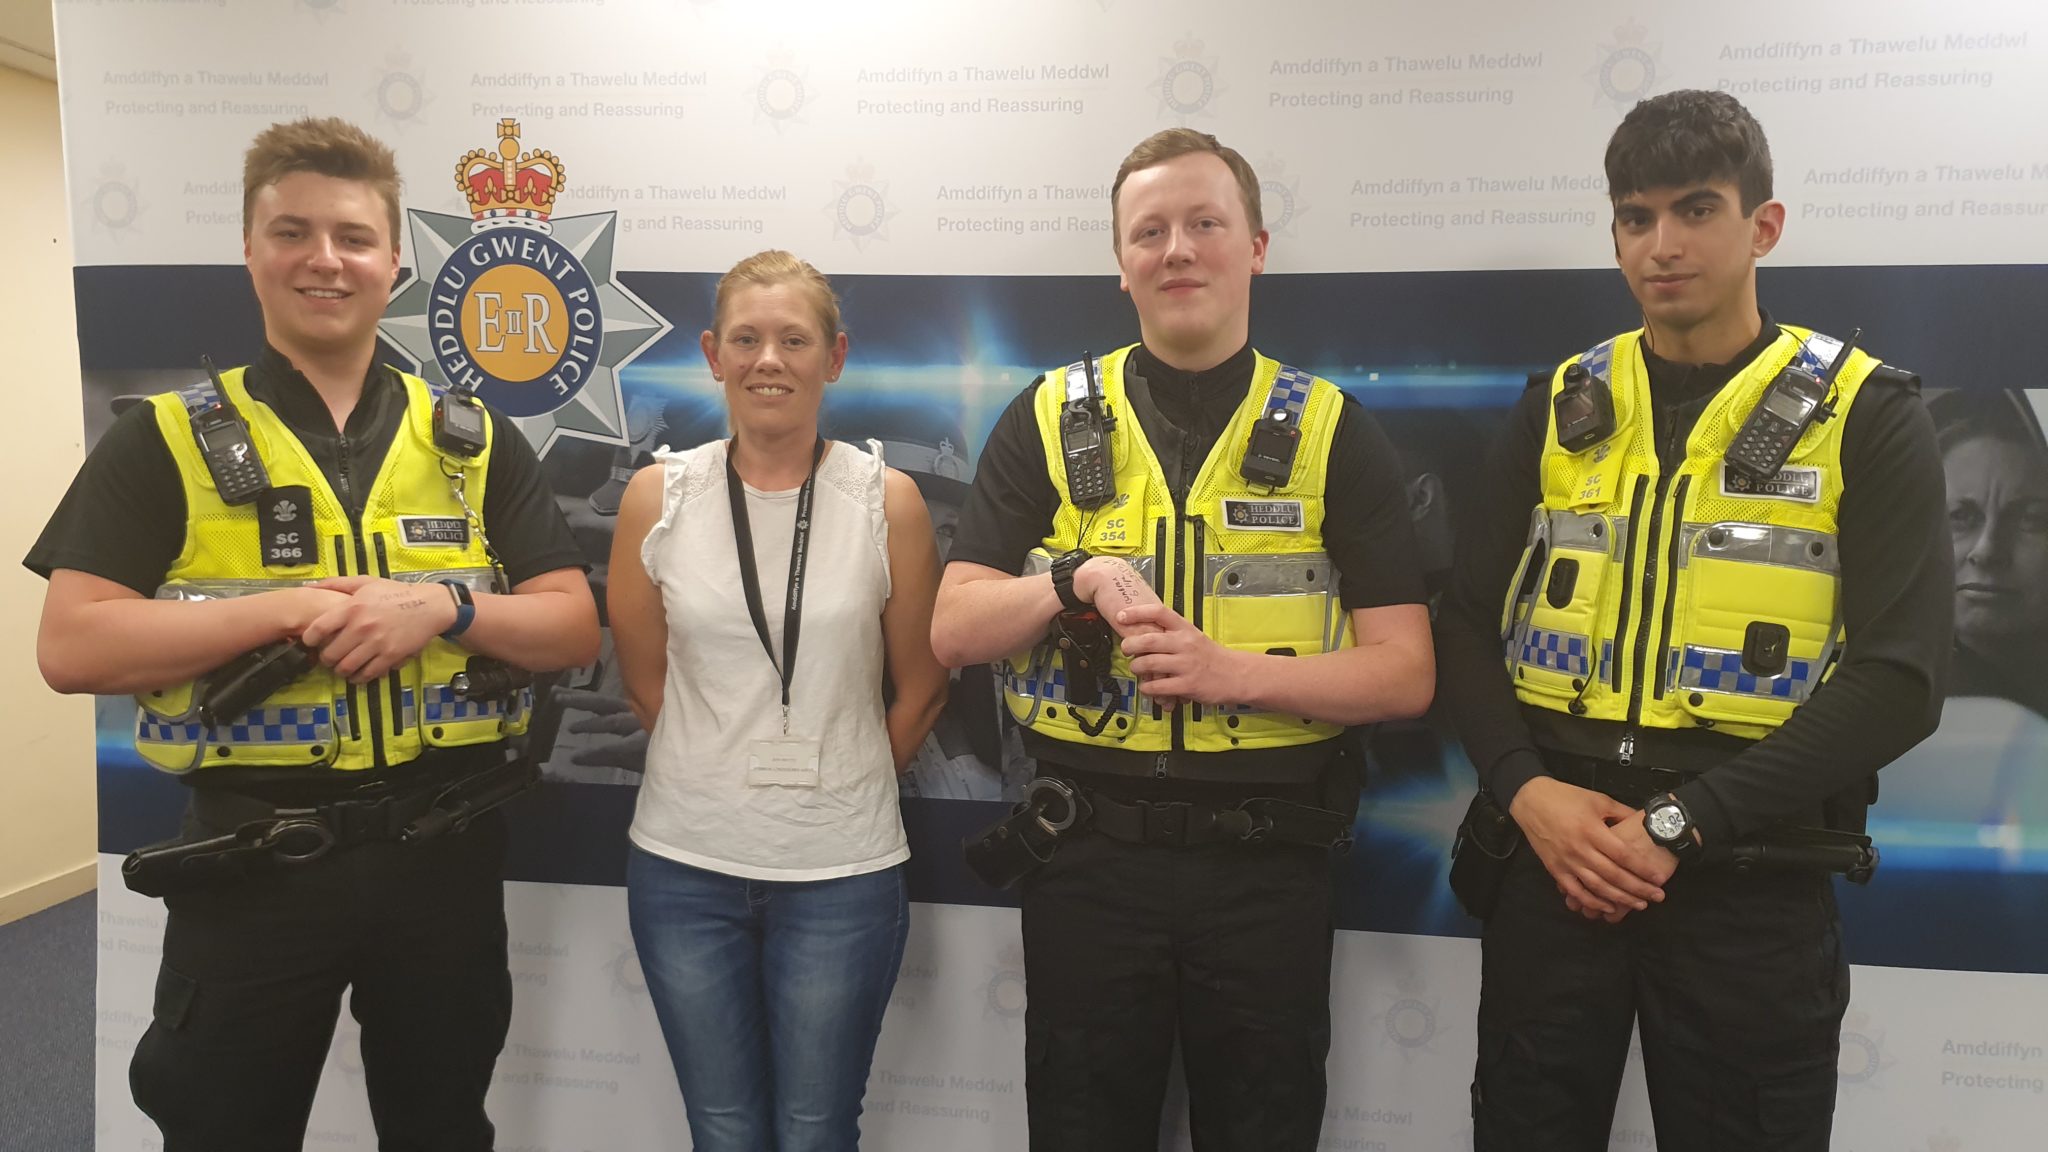 Laura Ellis, citizens In policing coordinator for Gwent Police, with three special constables